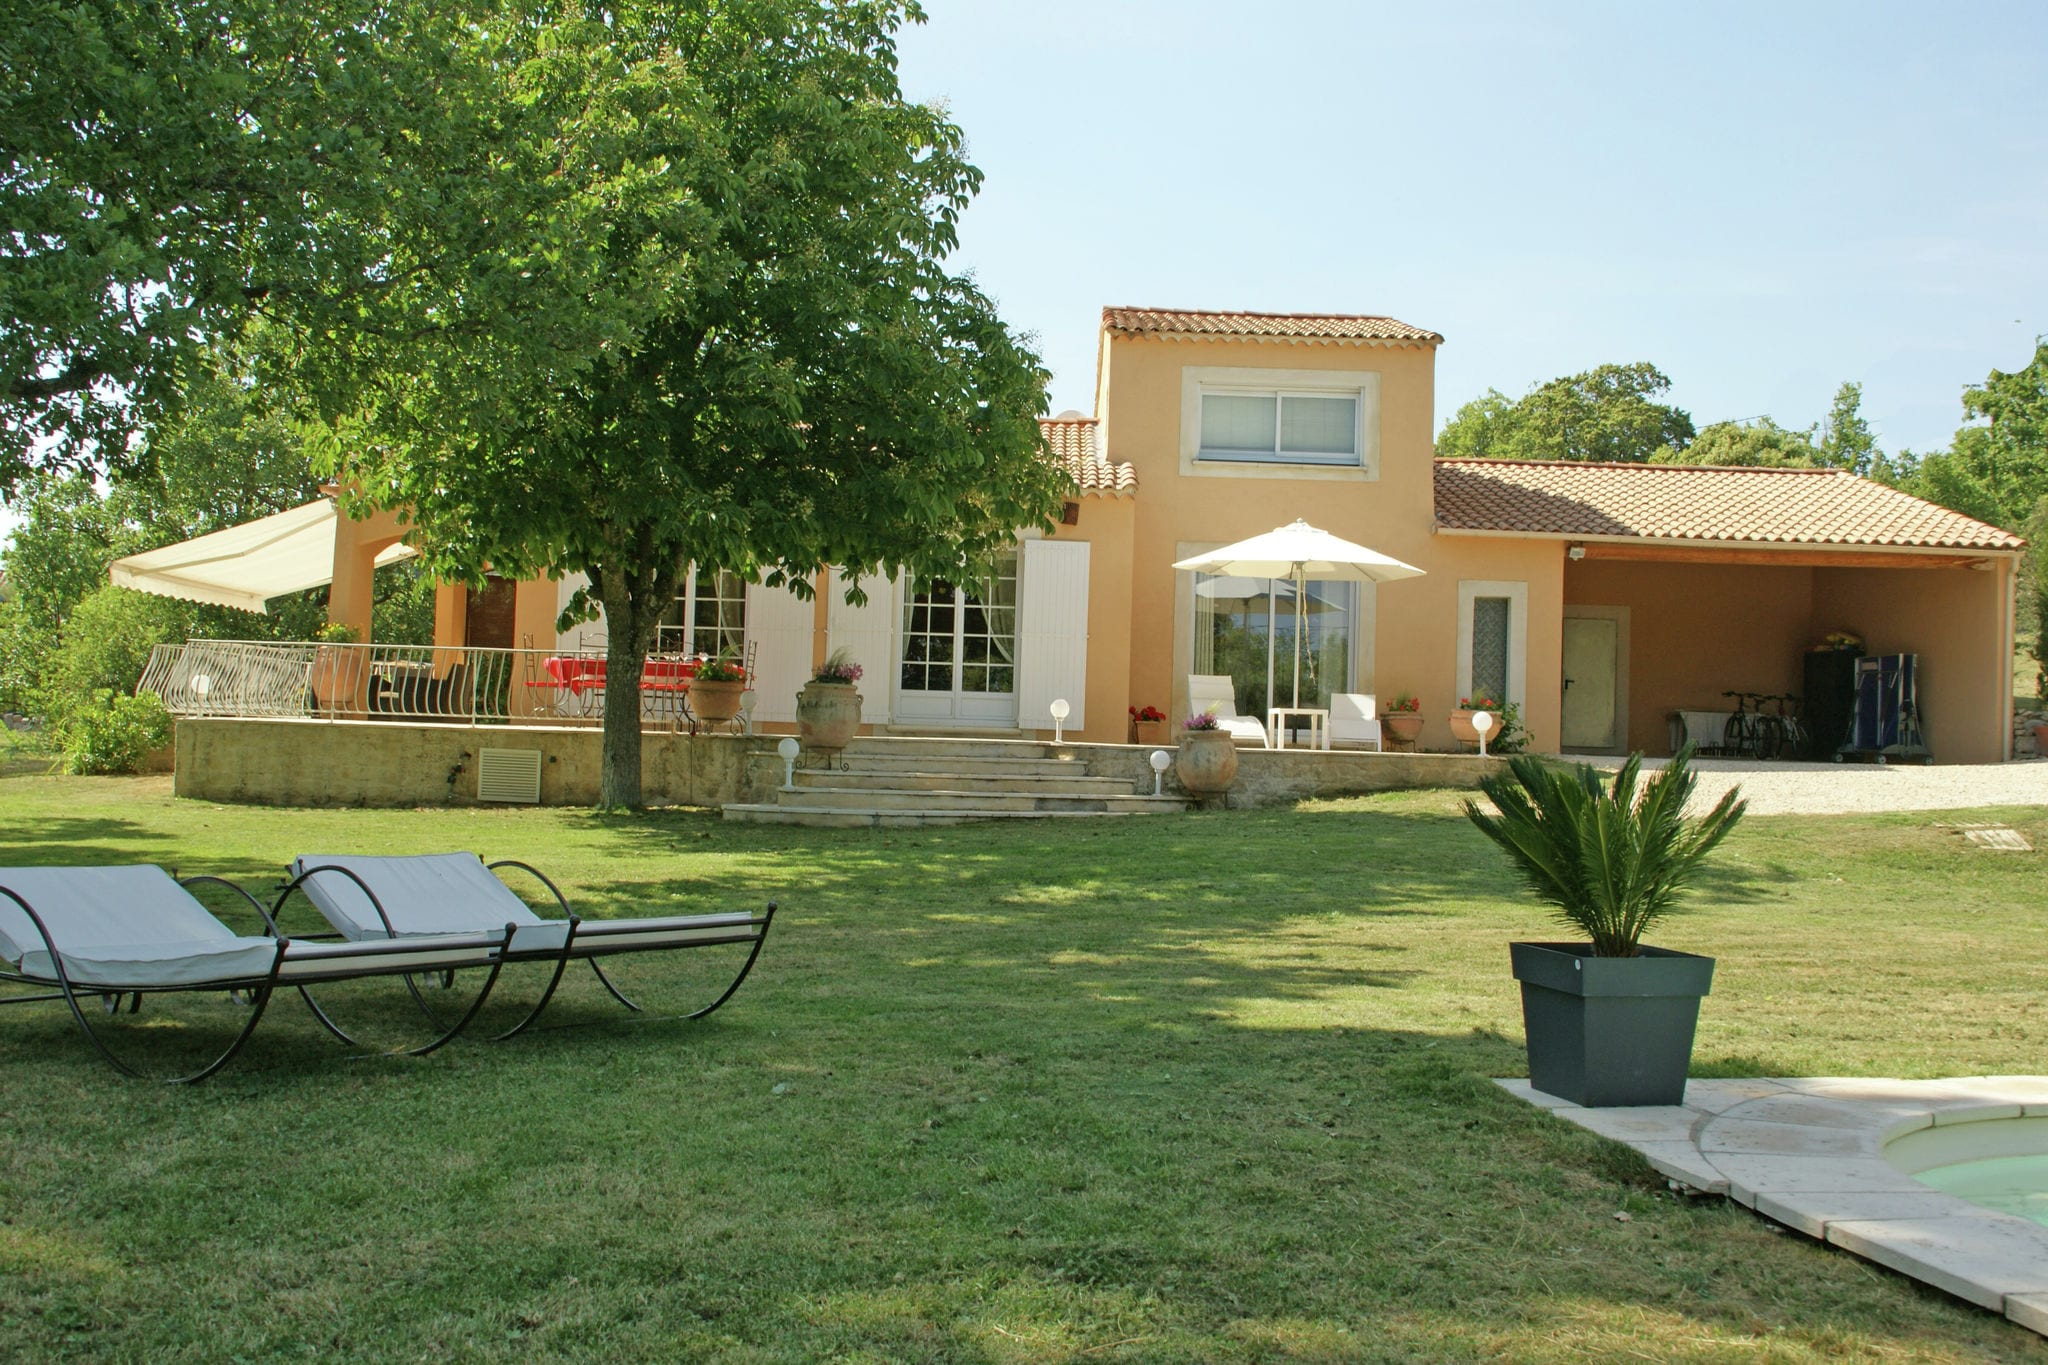 Detached villa with enclosed beautiful garden and private pool, 1km from Céreste